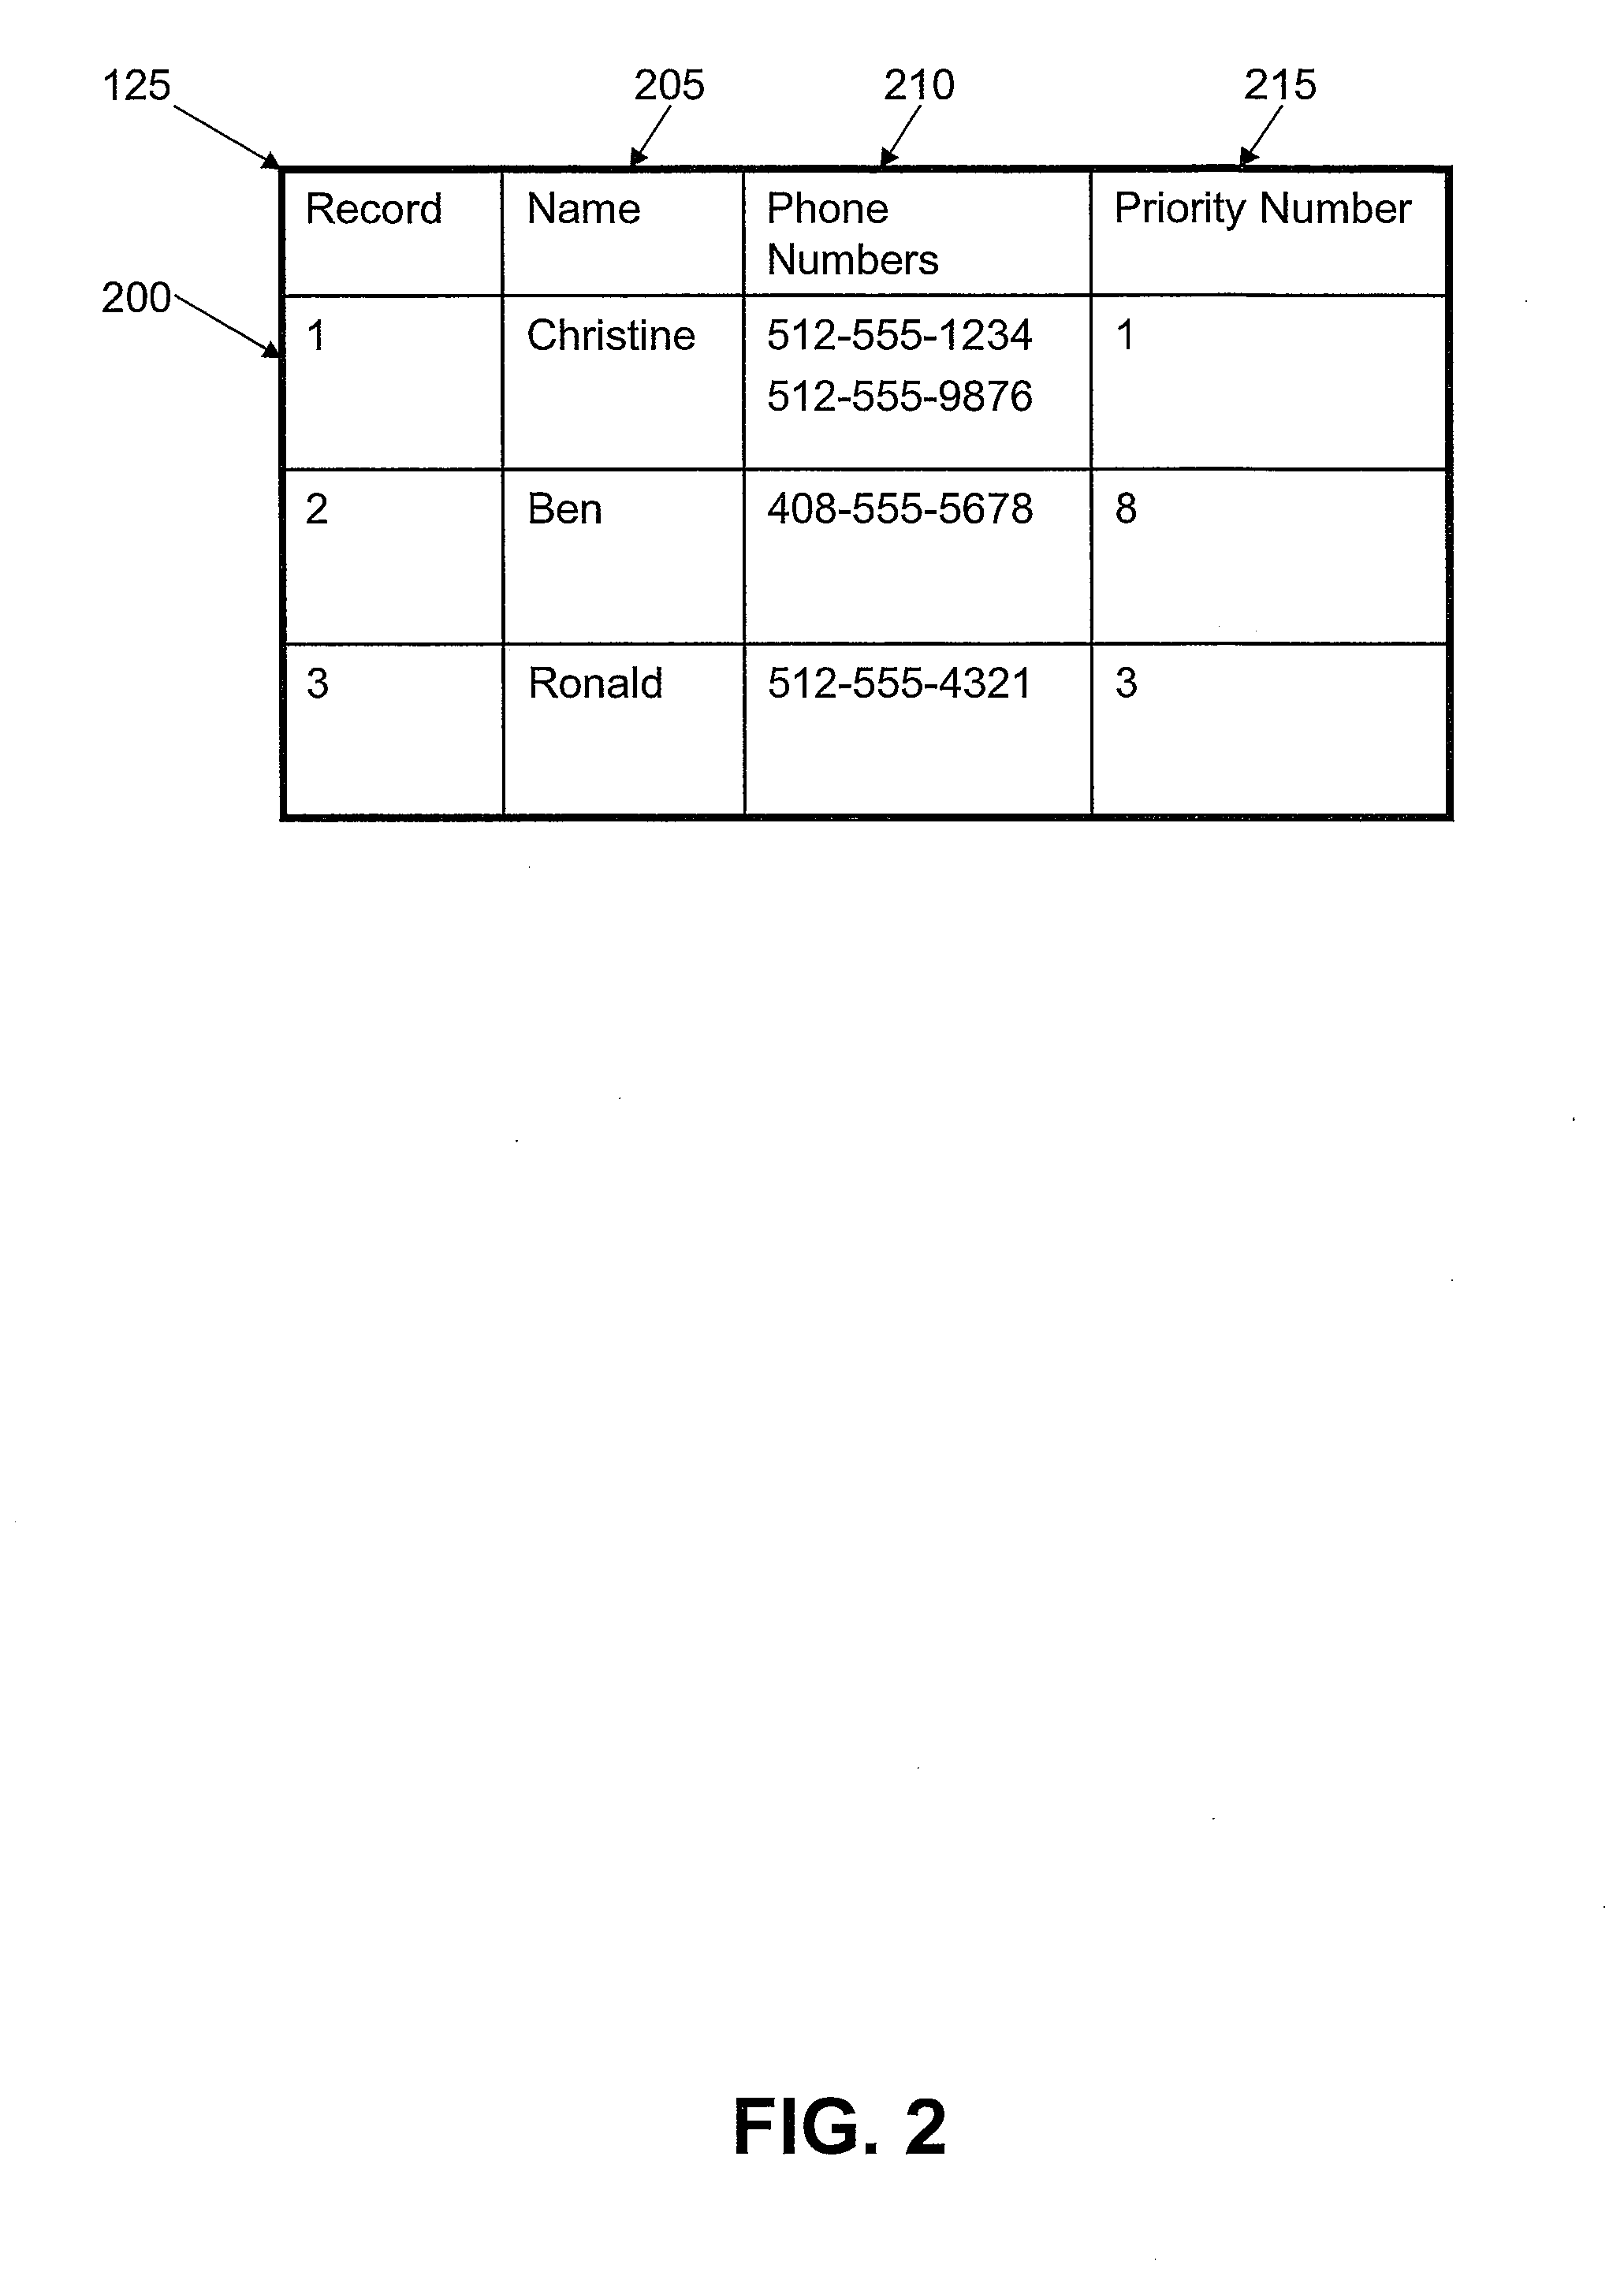 Method and system for assigning call waiting priorities to phone numbers